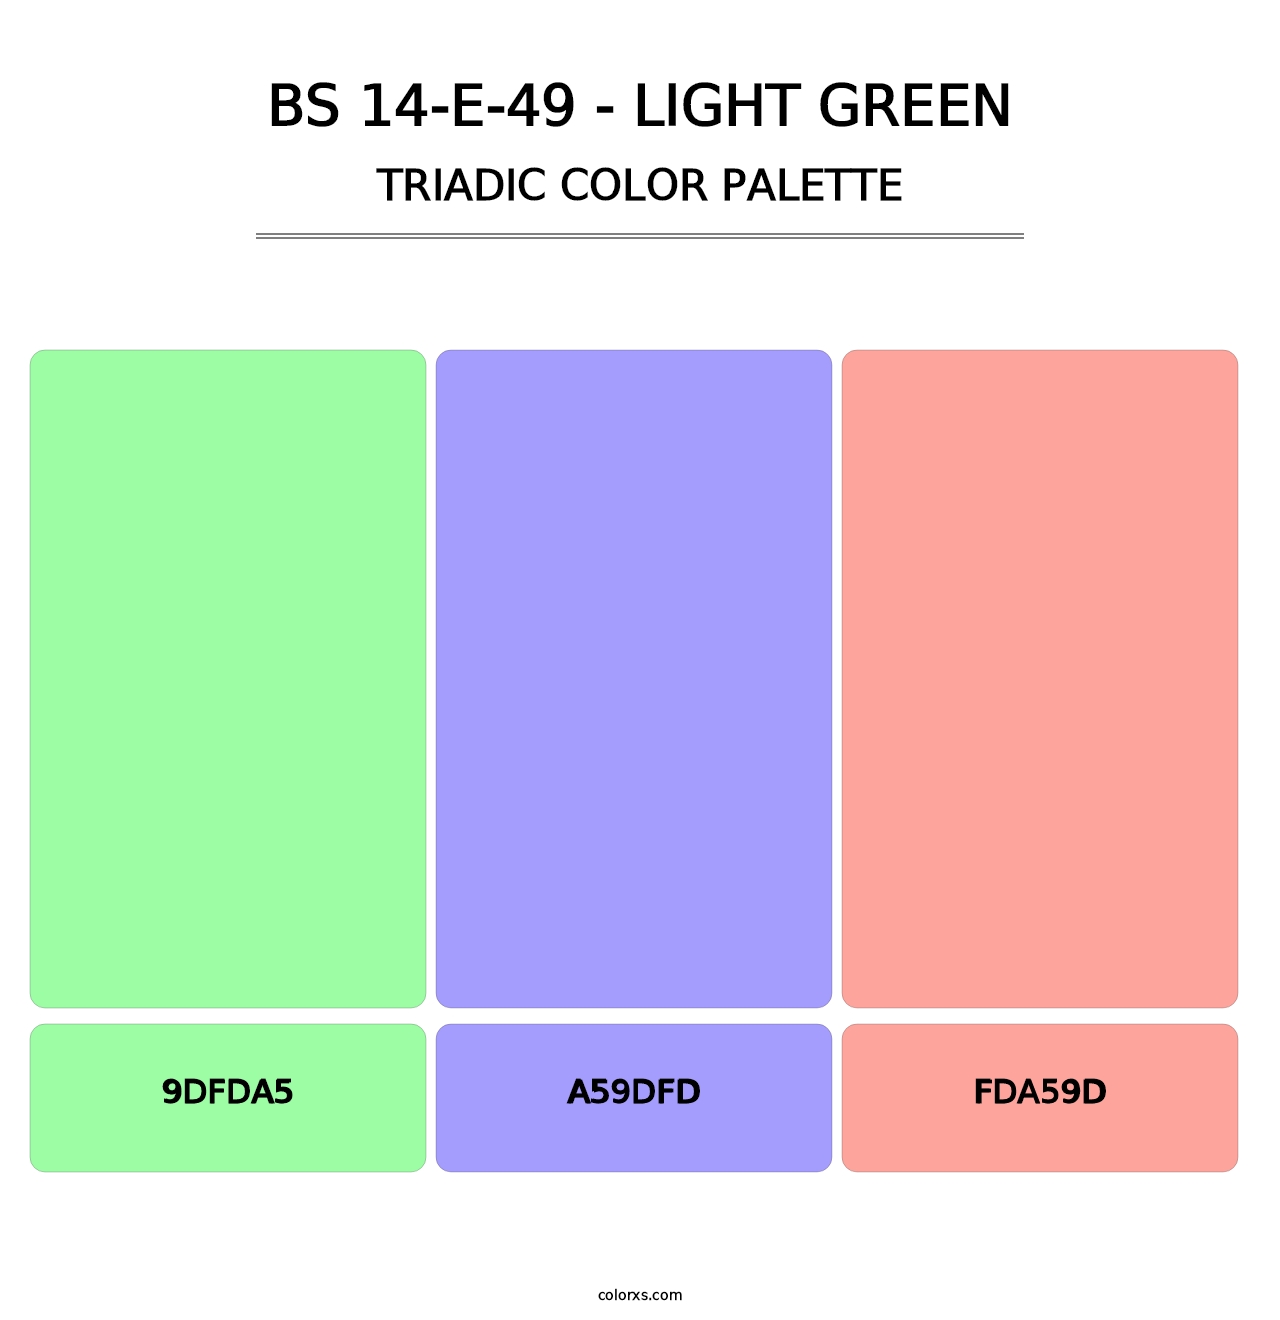 BS 14-E-49 - Light Green - Triadic Color Palette